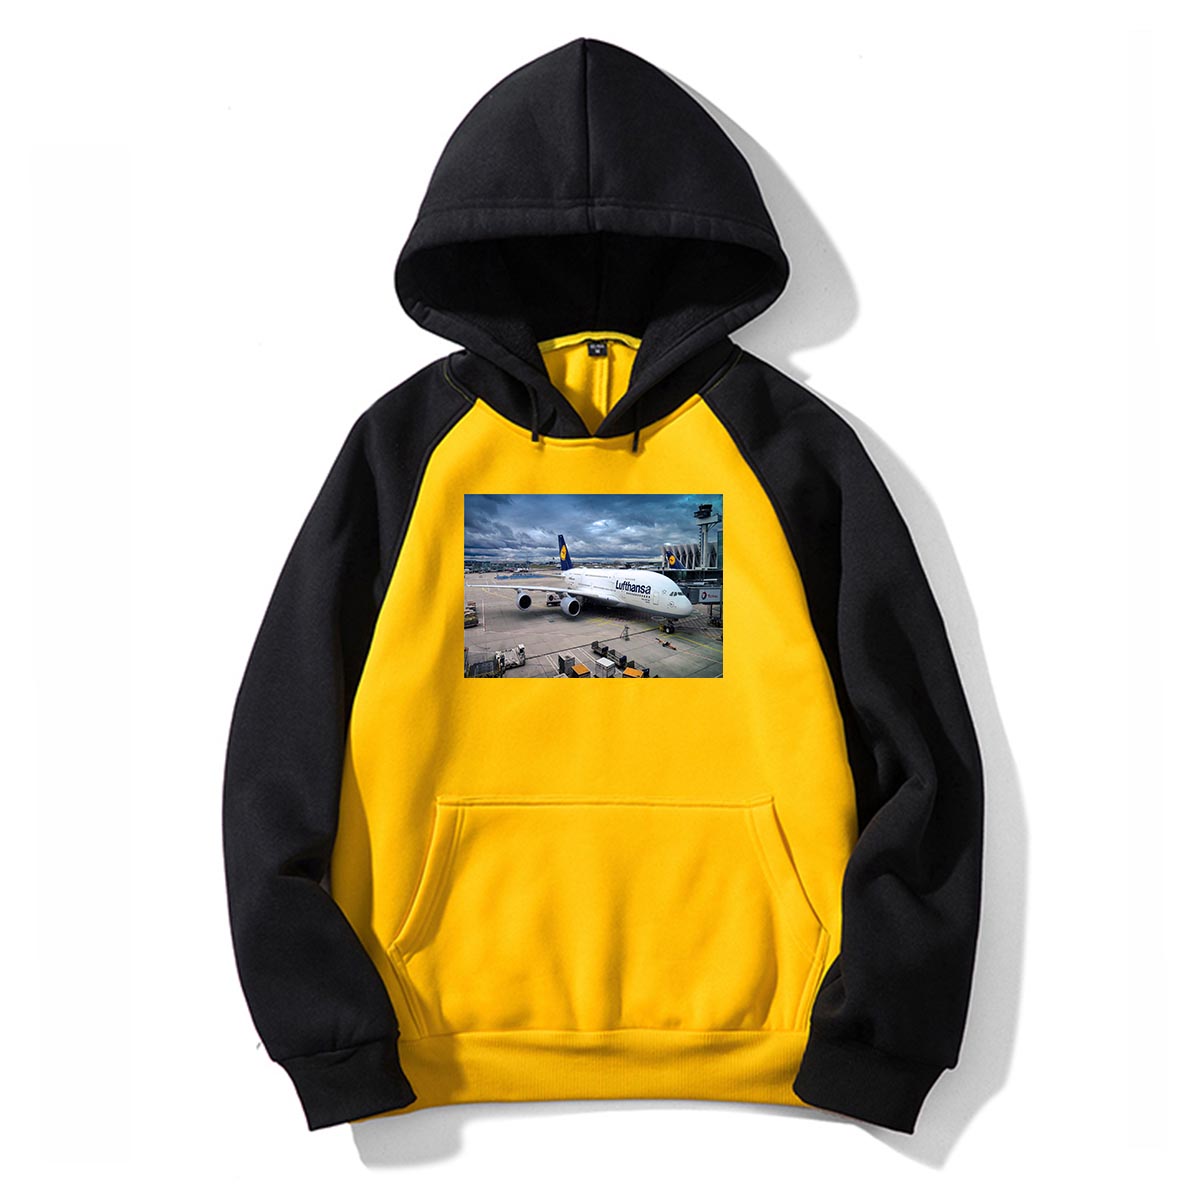 Lufthansa's A380 At The Gate Designed Colourful Hoodies